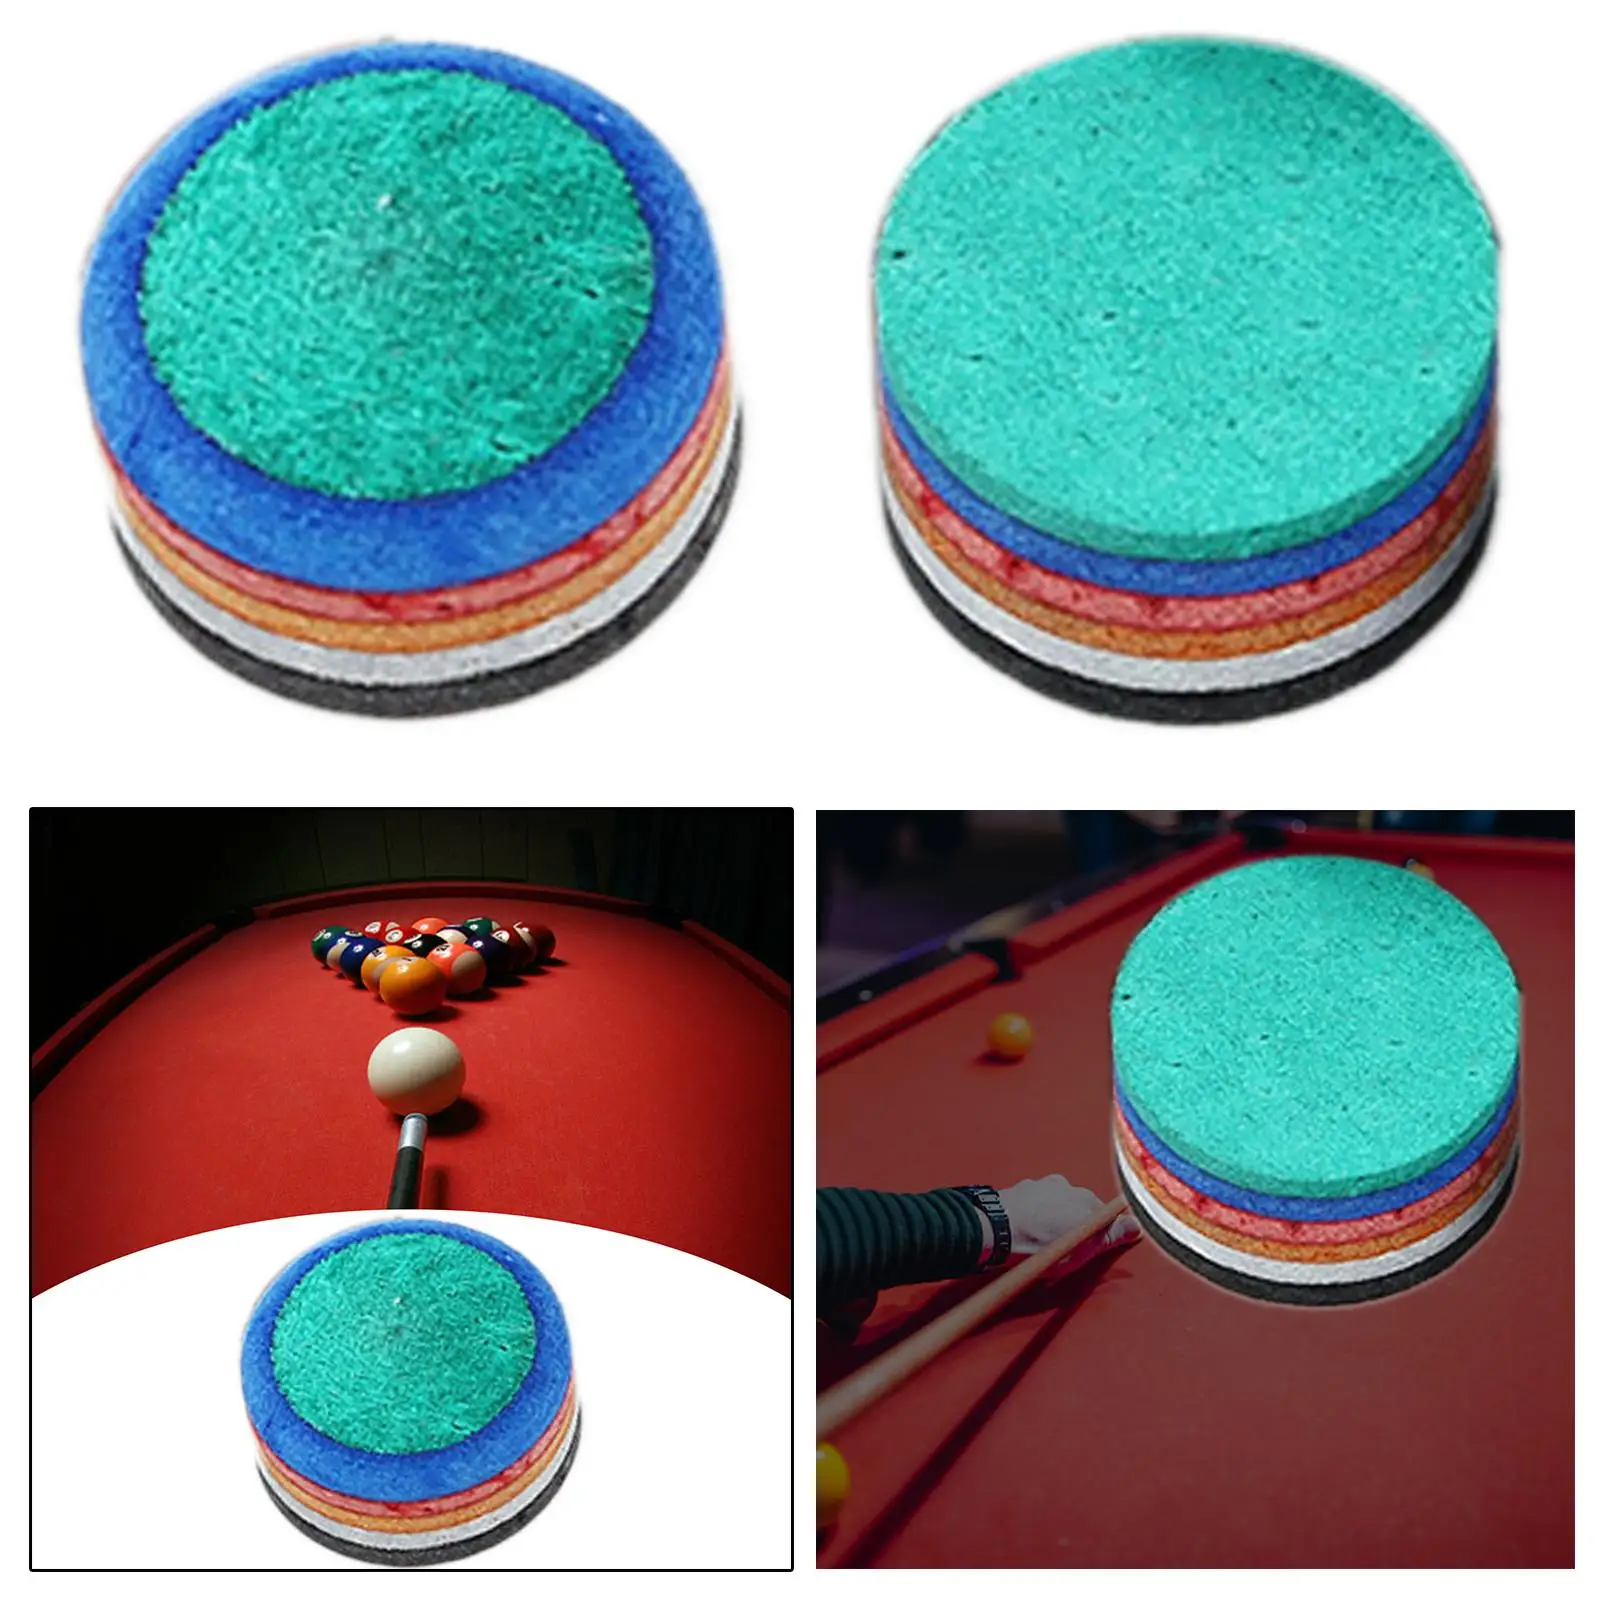 Pool Cue Tip Hard Snooker Pool Cue Tip Multiple Layer Glue on Durable Head for